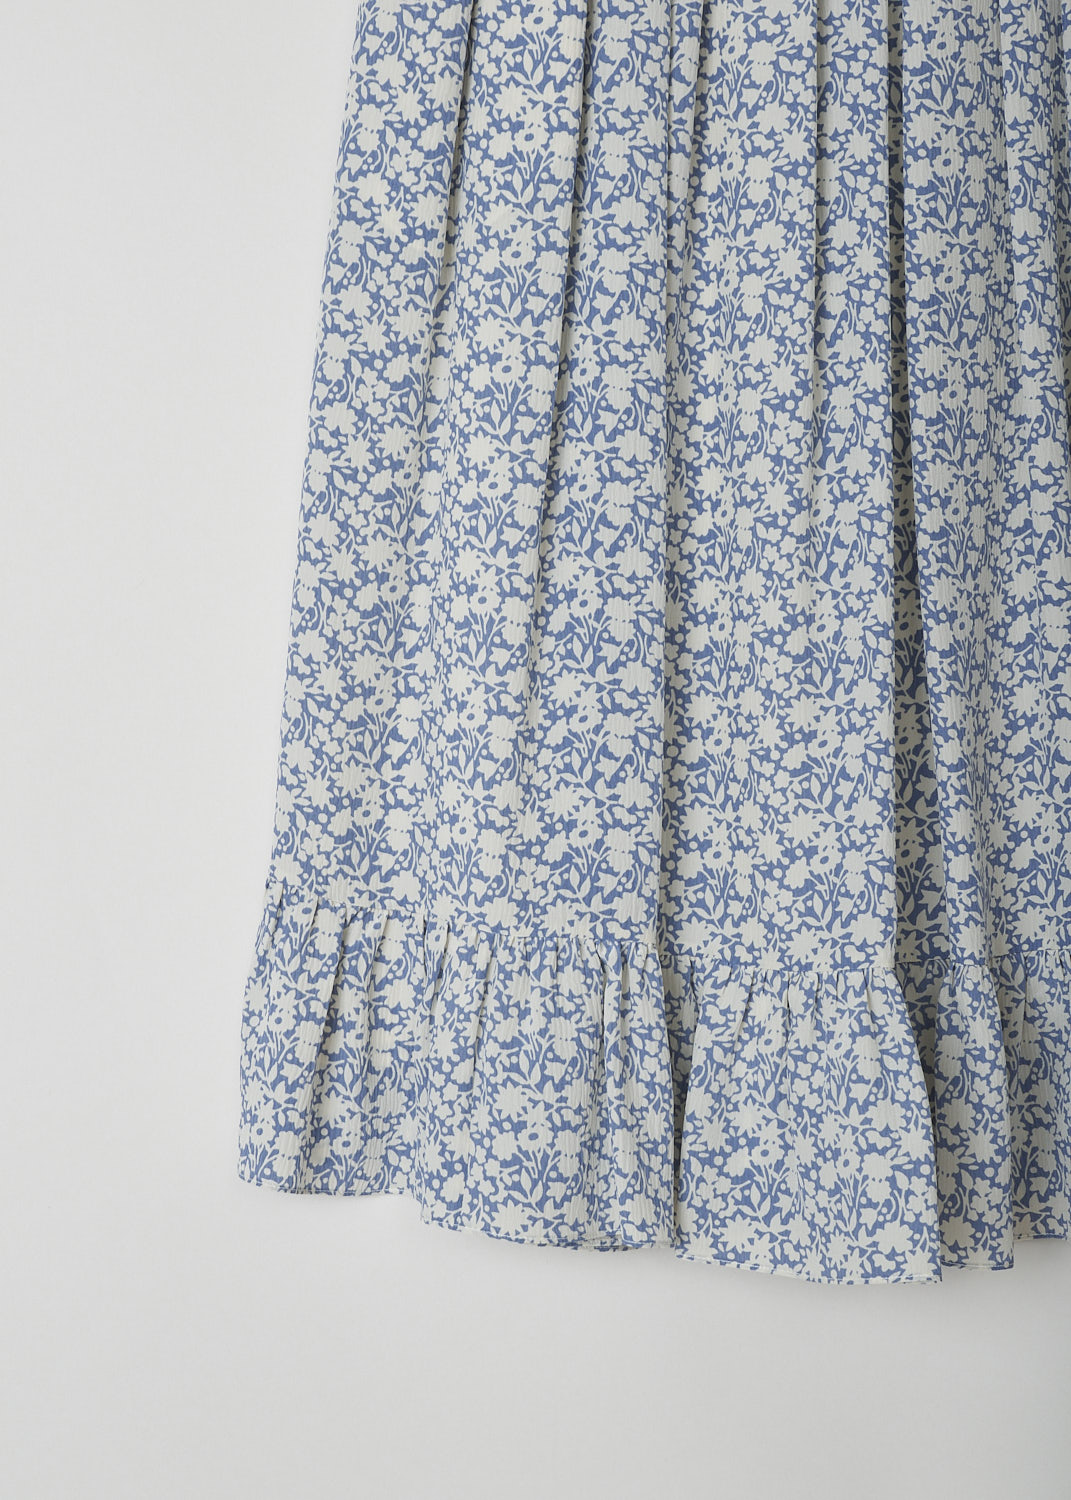 CELINE, BLUE AND WHITE FLORAL MIDI SKIRT, 757L_2J264_07BW, Blue, White, Print, Detail, This blue and white floral pleated skirt has a concealed side zip, concealed slanted pockets and a flounce hemline. The skirt is midi length and is fully lined. 
